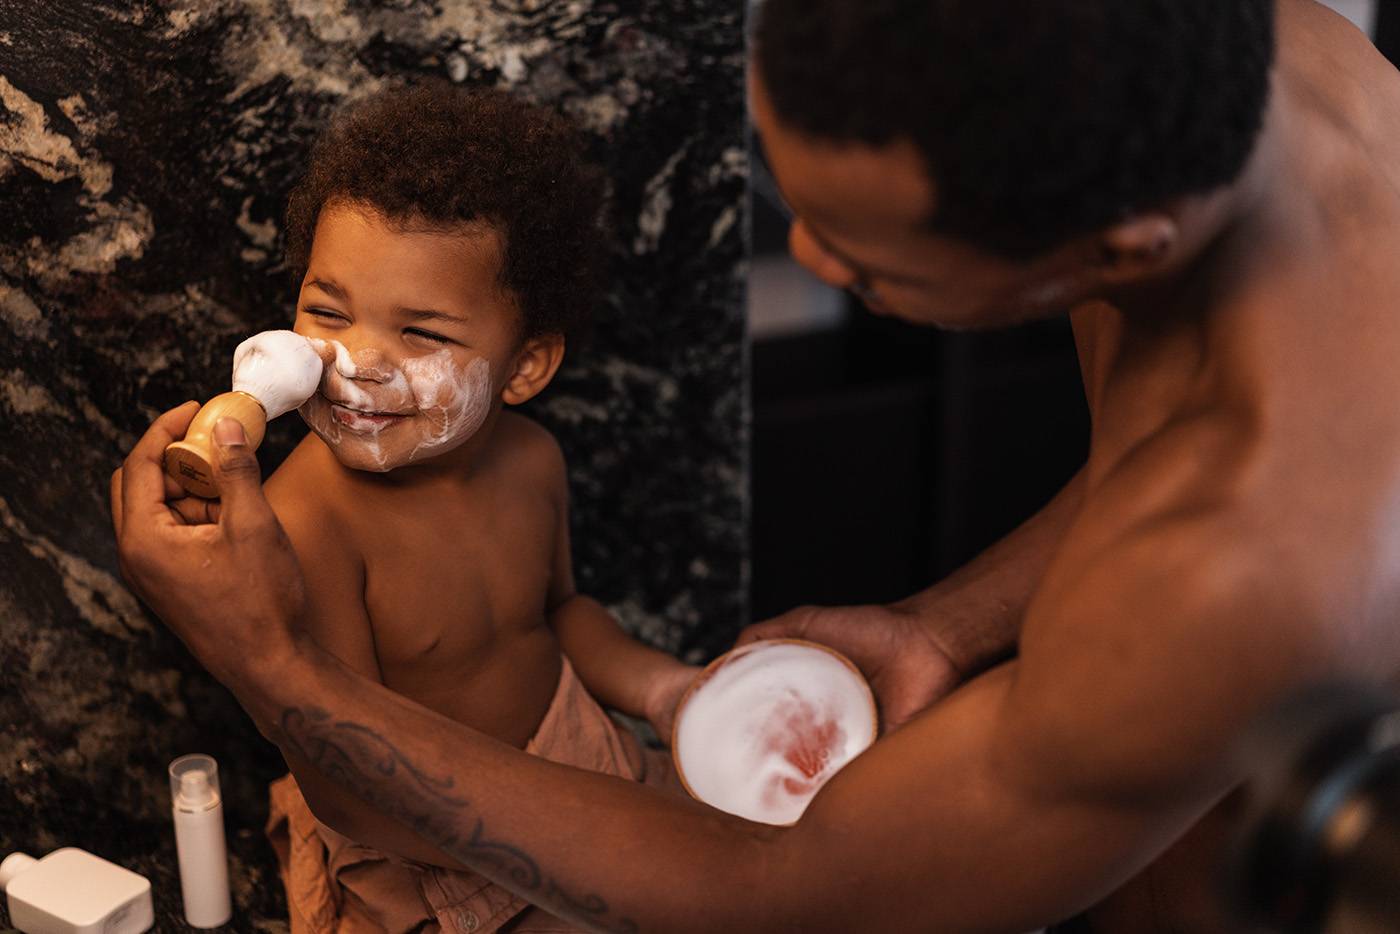 Father and son playing in the bathroom. Father is applying a shaving foam to a smiling kid's face.